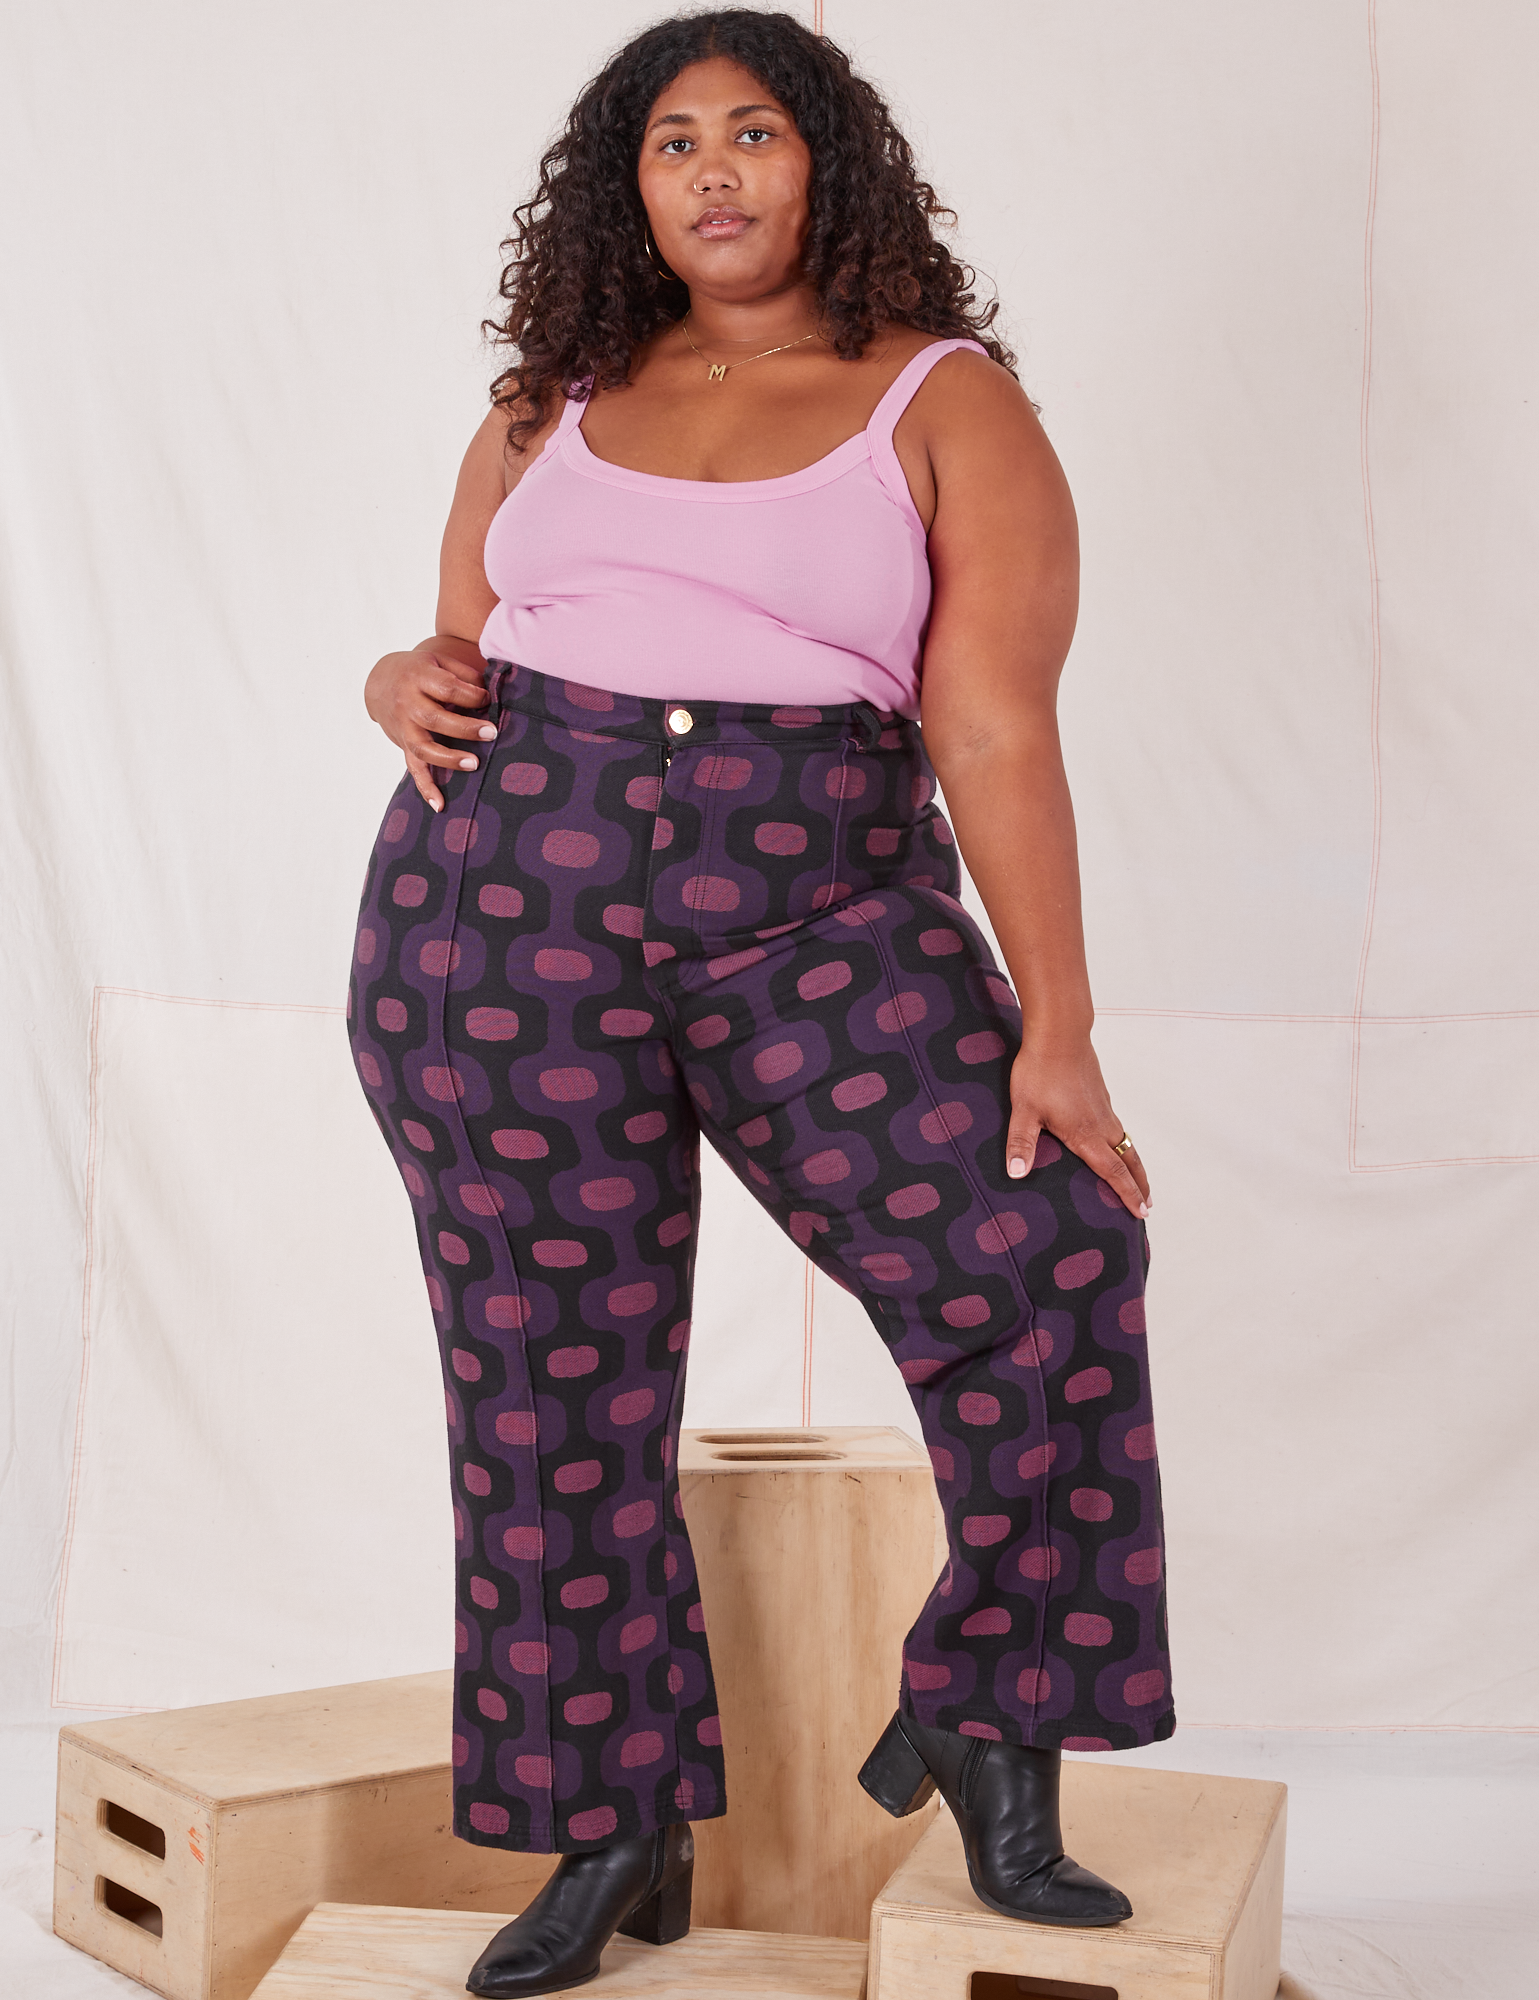 Morgan is 5&#39;5&quot; and wearing 1XL Western Pants in Purple Tile Jacquard paired with bubblegum pink Cami